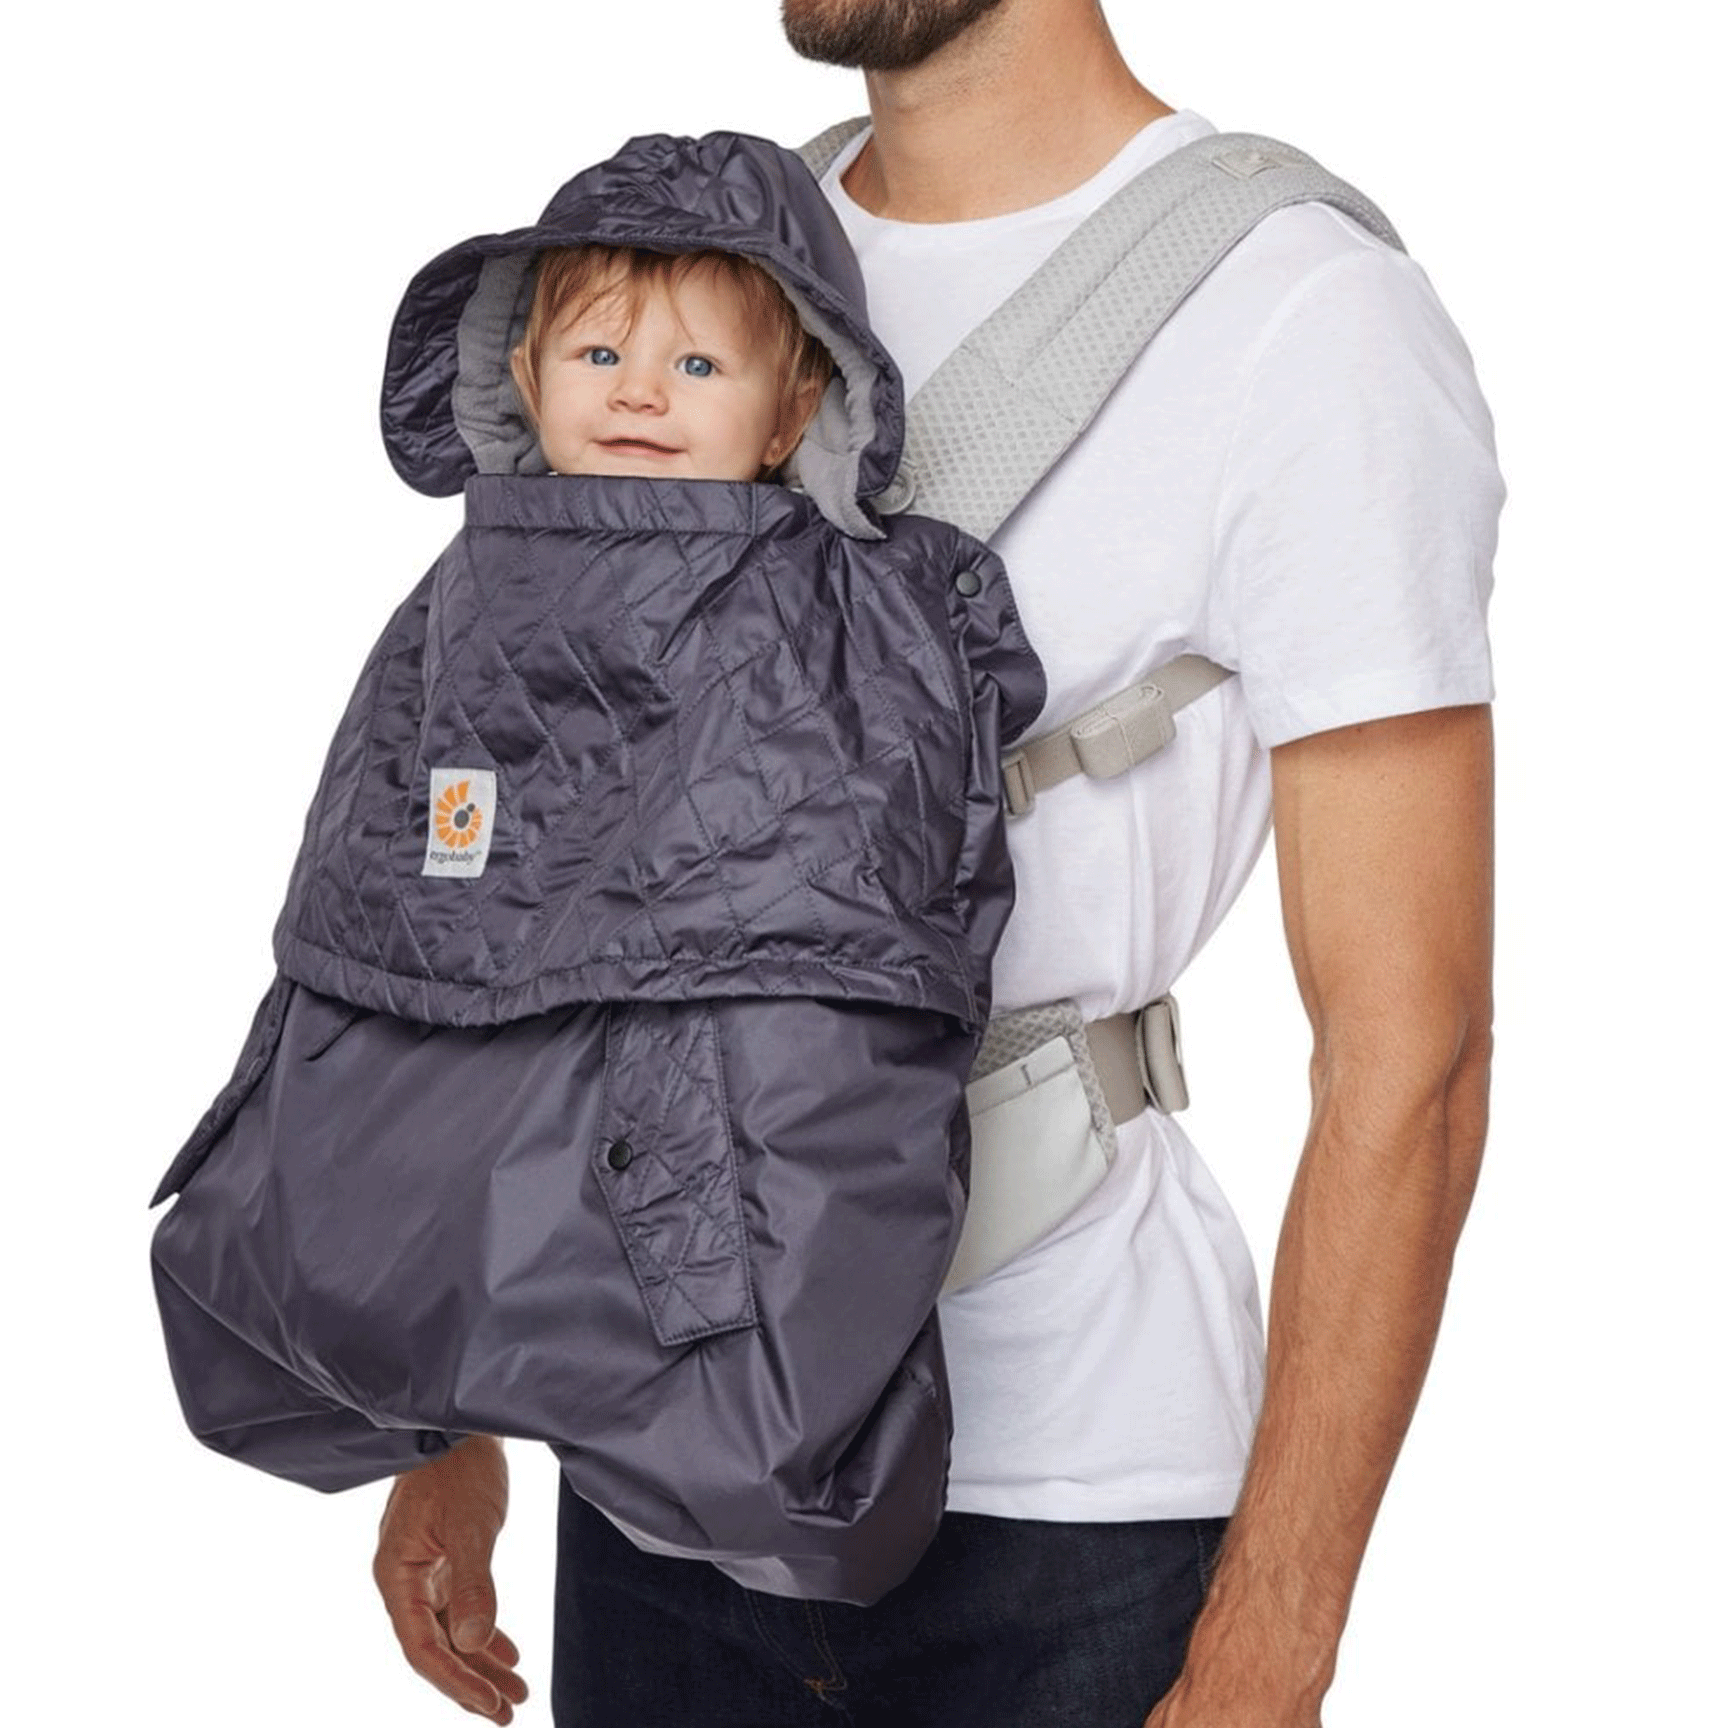 Ergobaby baby carriers Ergobaby Carrier All Weather Cover - Charcoal WCWCHAR